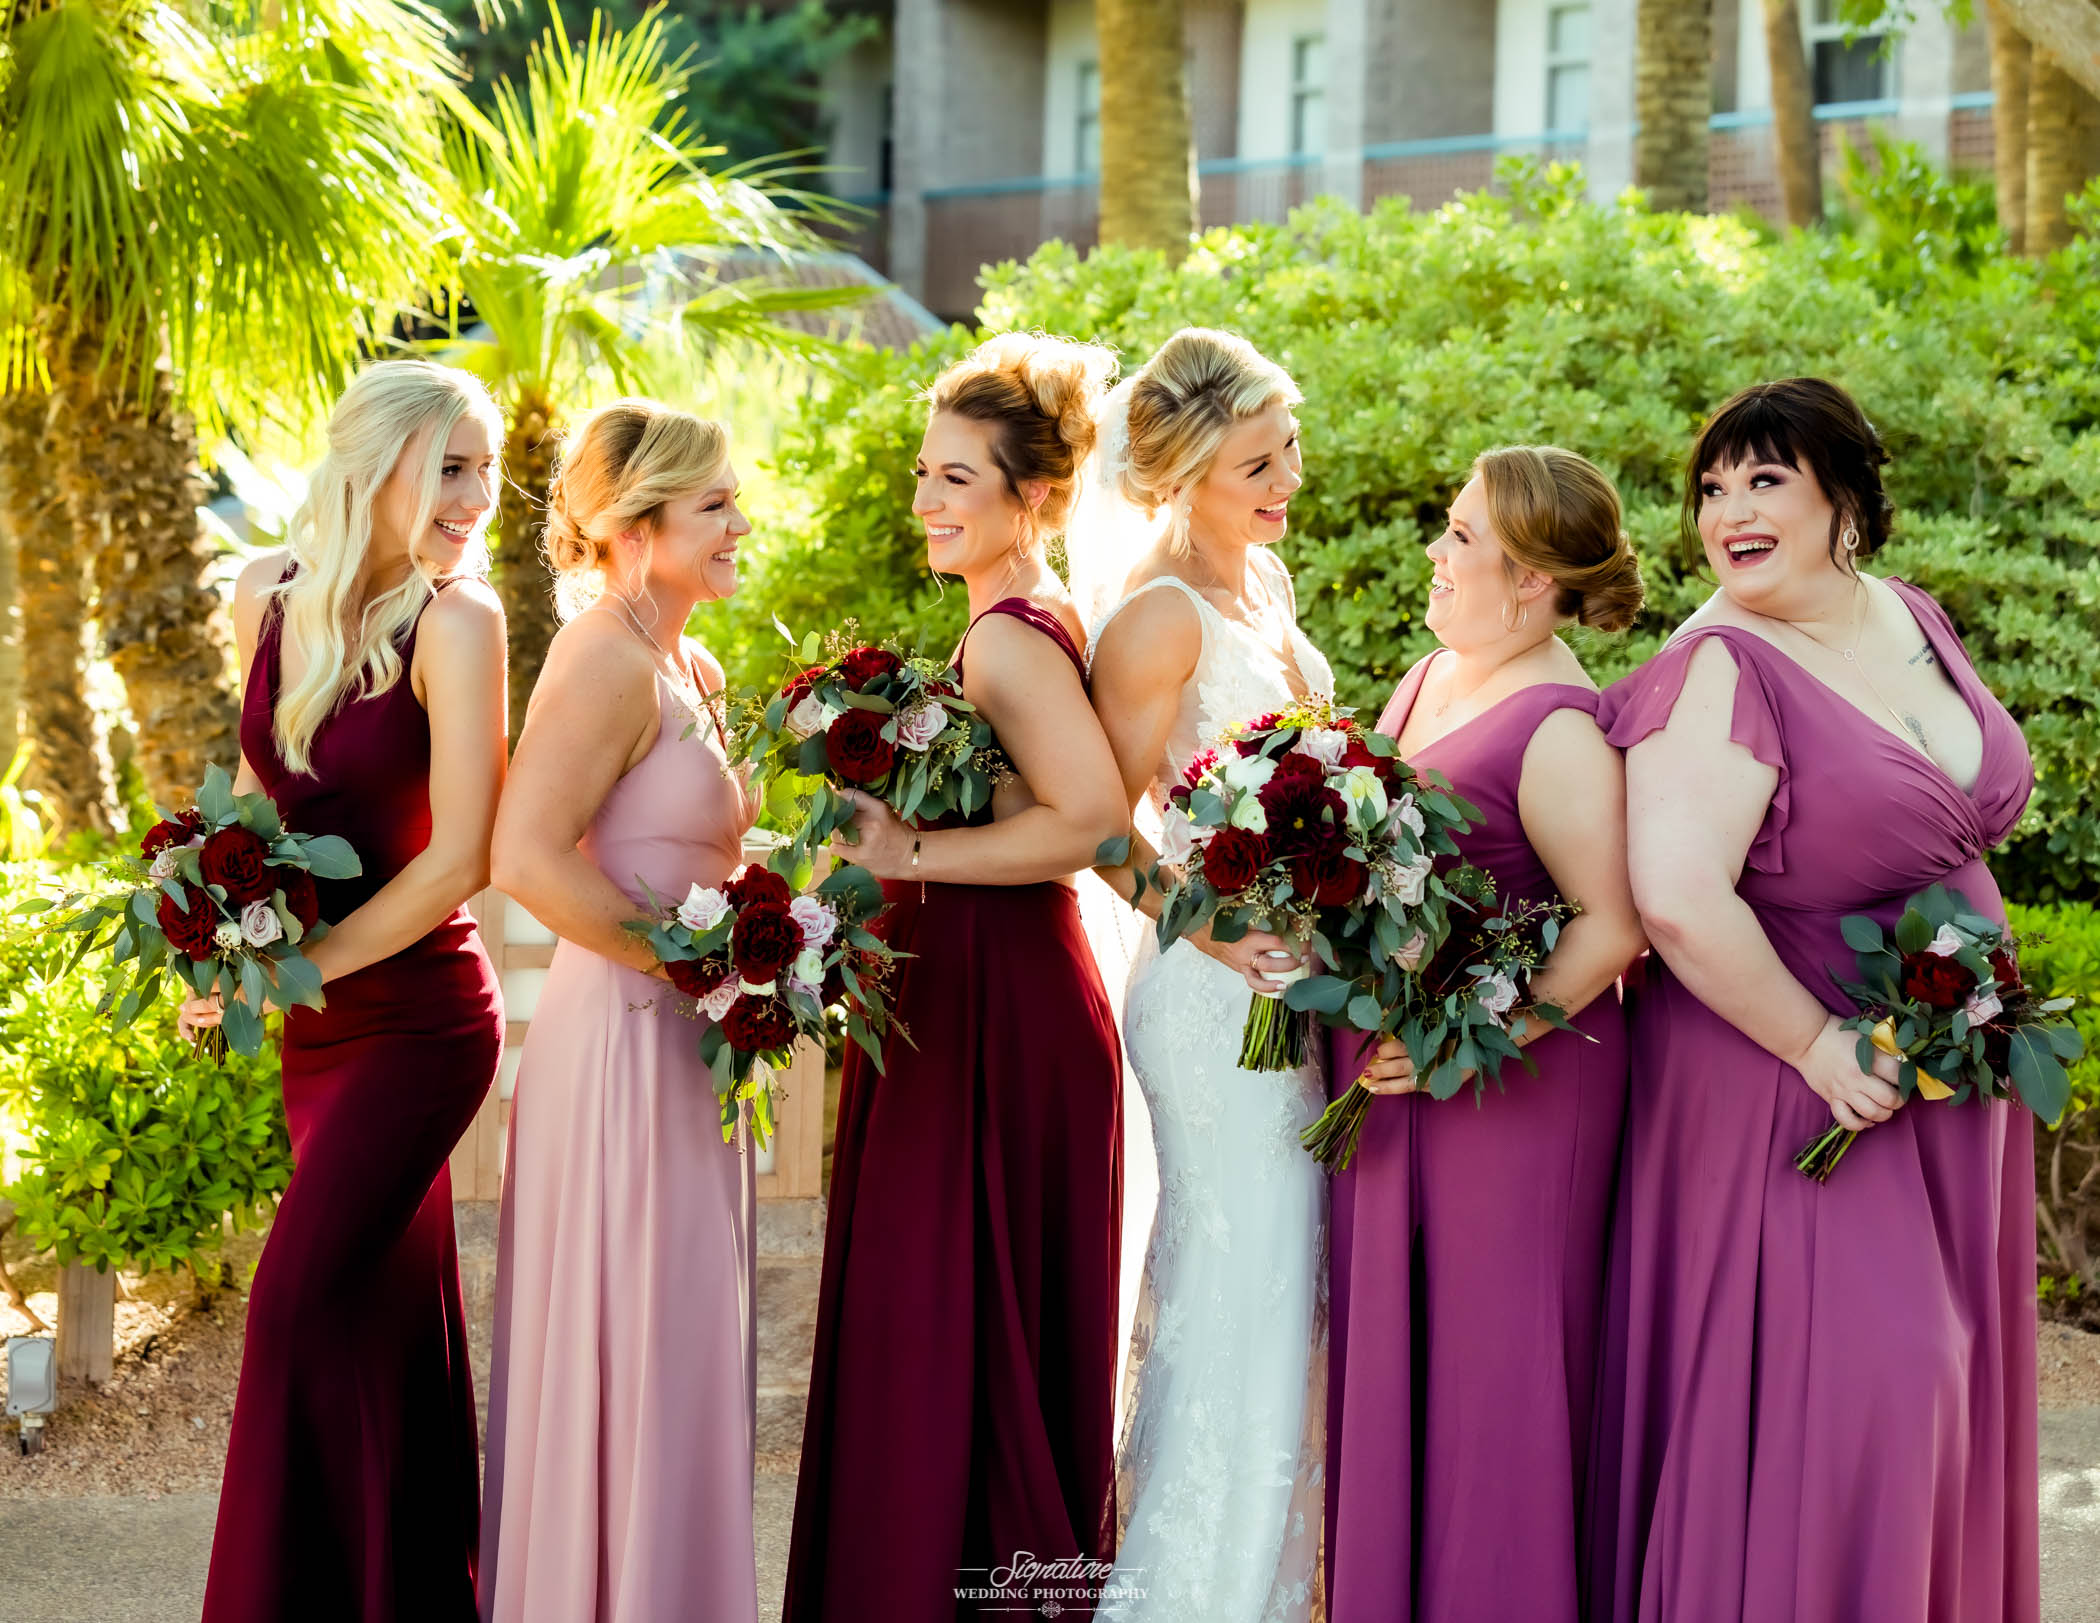 Bride with bridal party smiling at each other